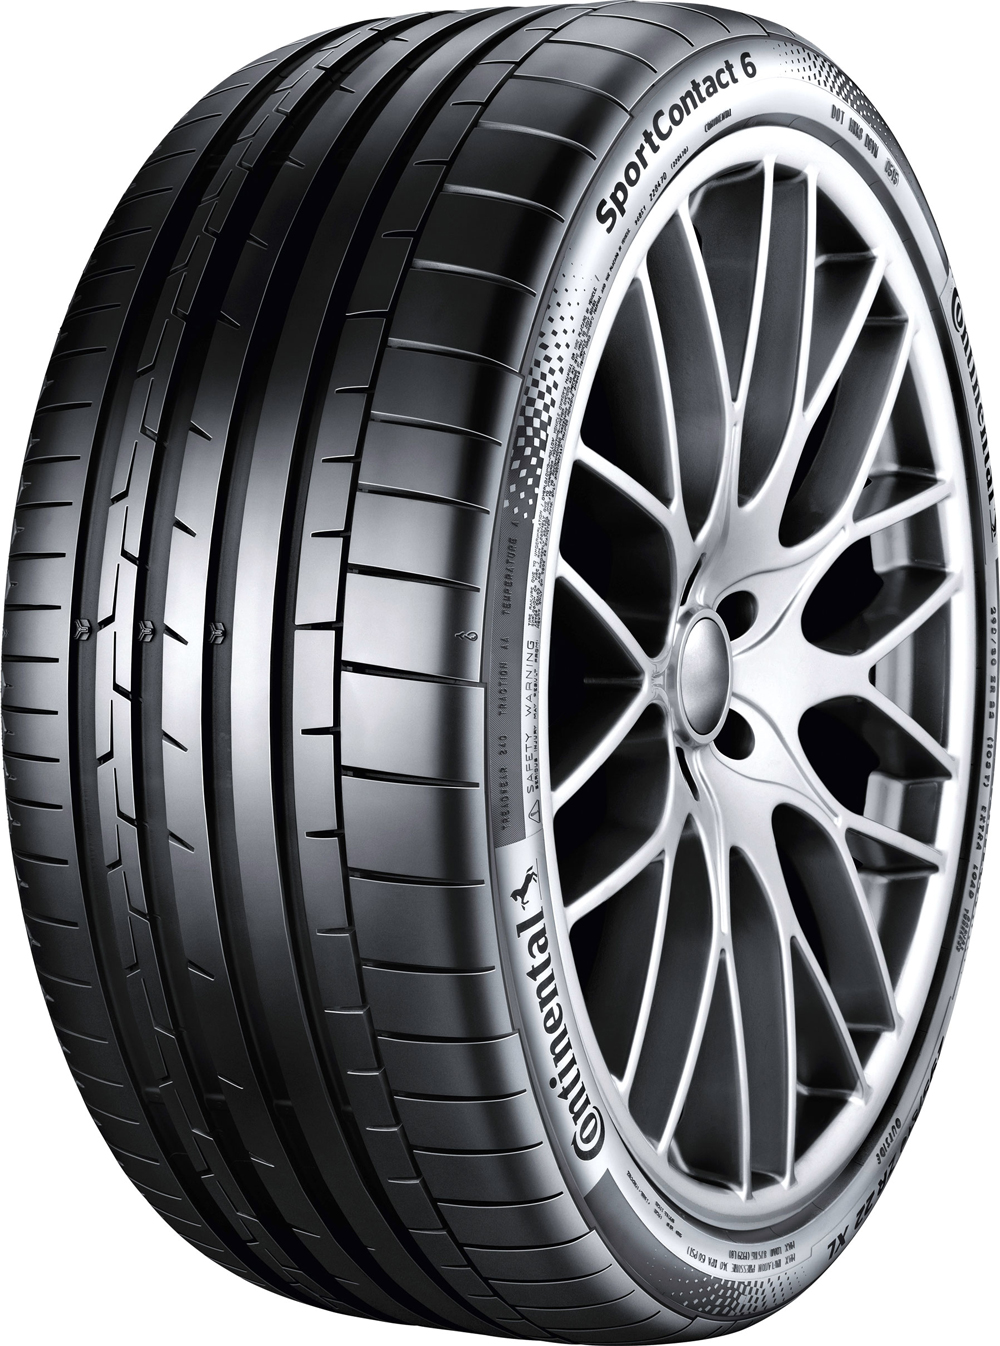 Anvelope auto CONTINENTAL CSC6AOX XL AUDI 295/35 R23 108Y